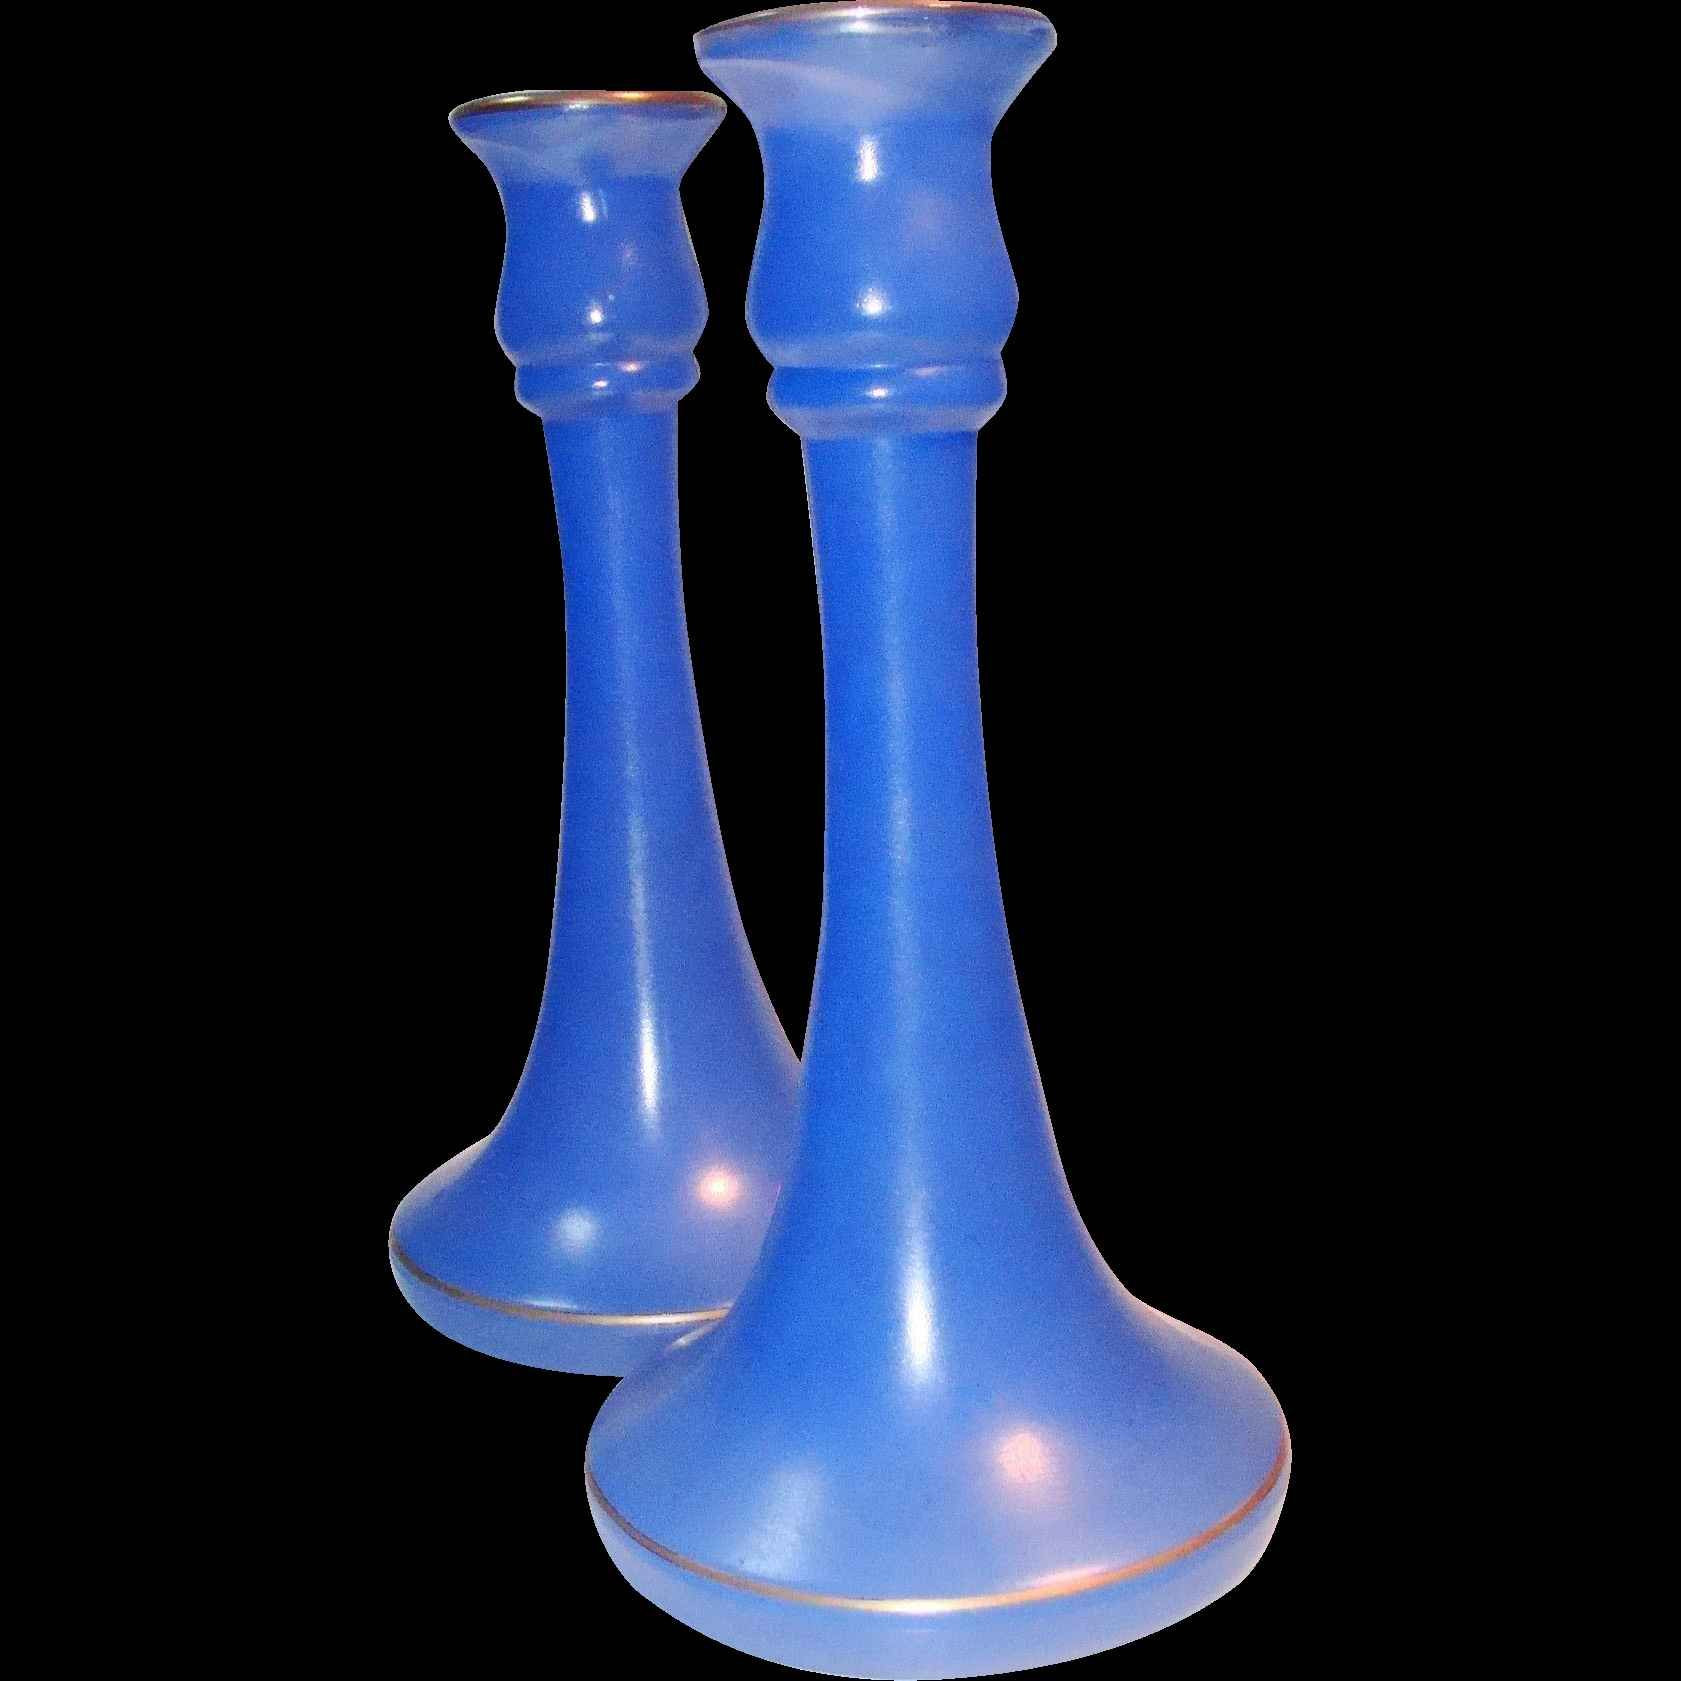 23 Popular Fenton Blue Glass Vase Antique 2024 free download fenton blue glass vase antique of 37 fenton blue glass vase the weekly world with regard to 37 fenton blue glass vase